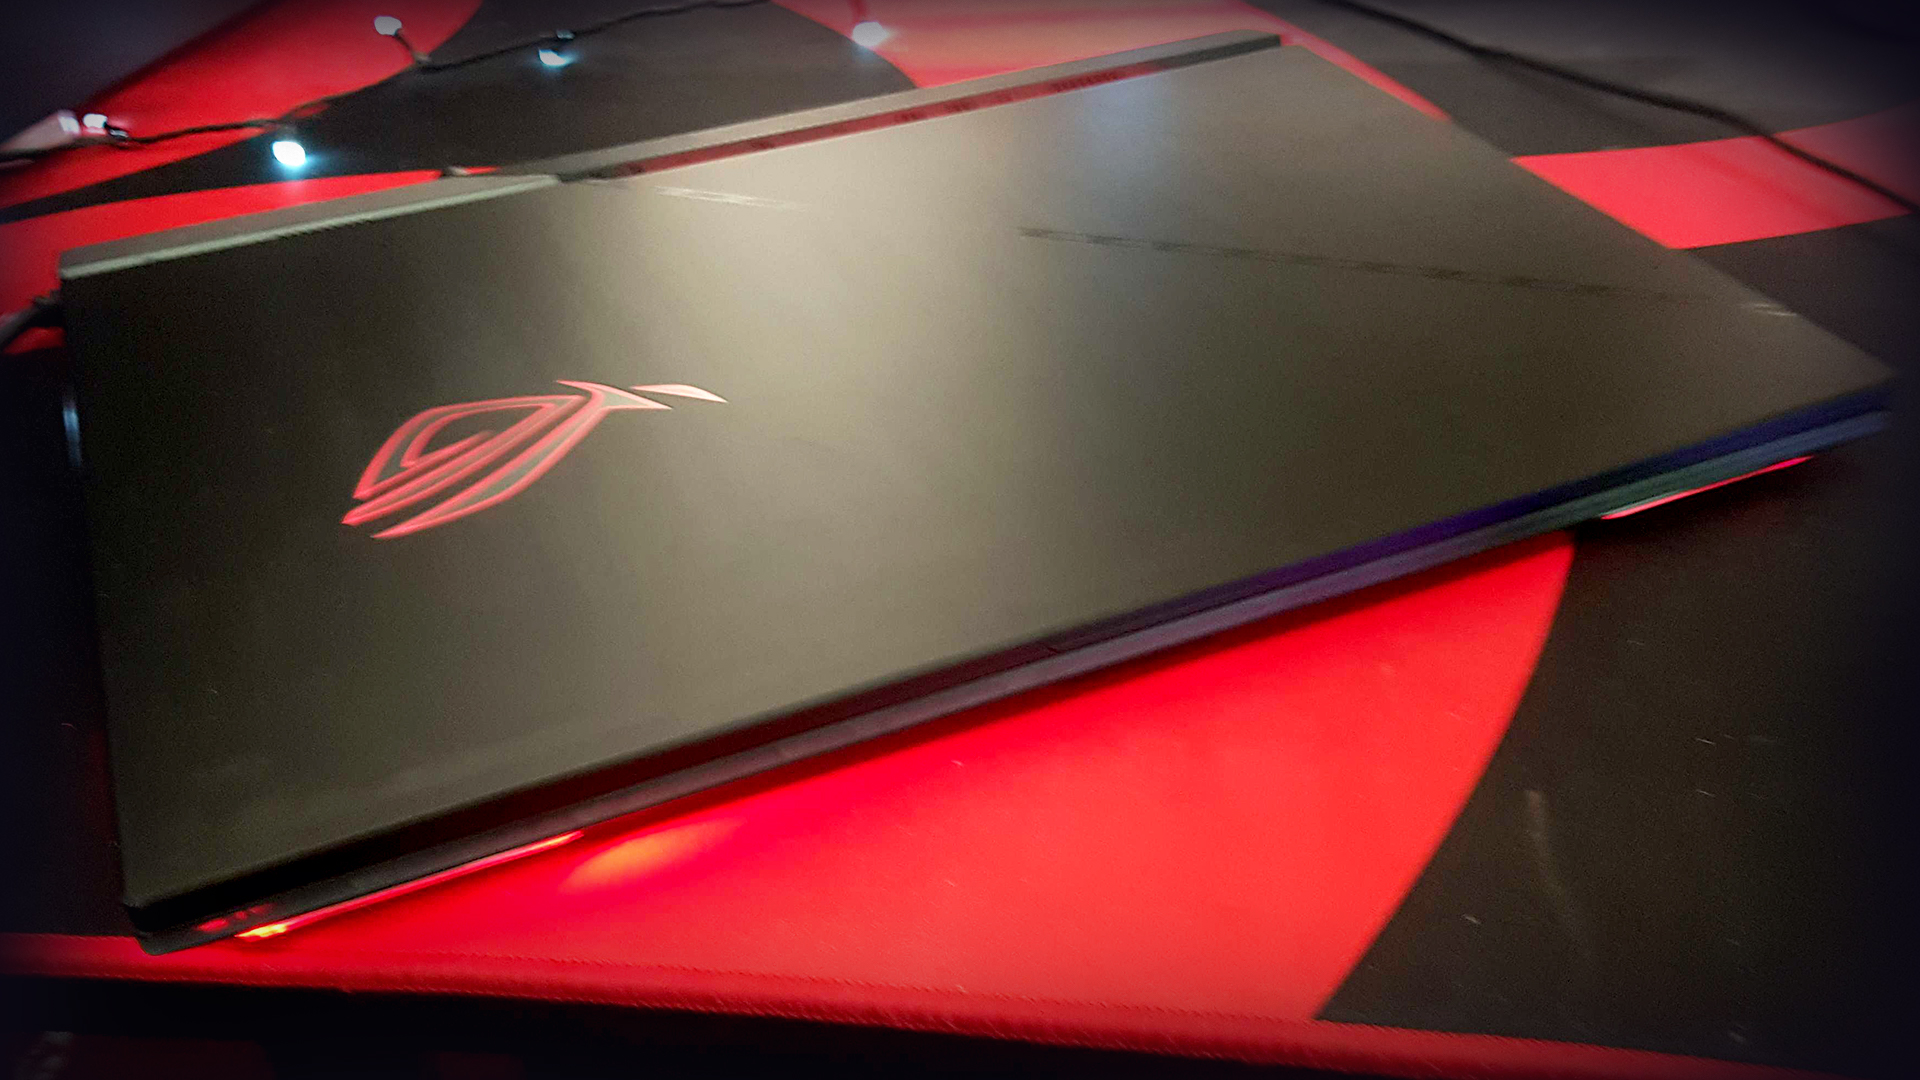 Asus ROG Strix Scar 17 with lid closed on a gaming desk.